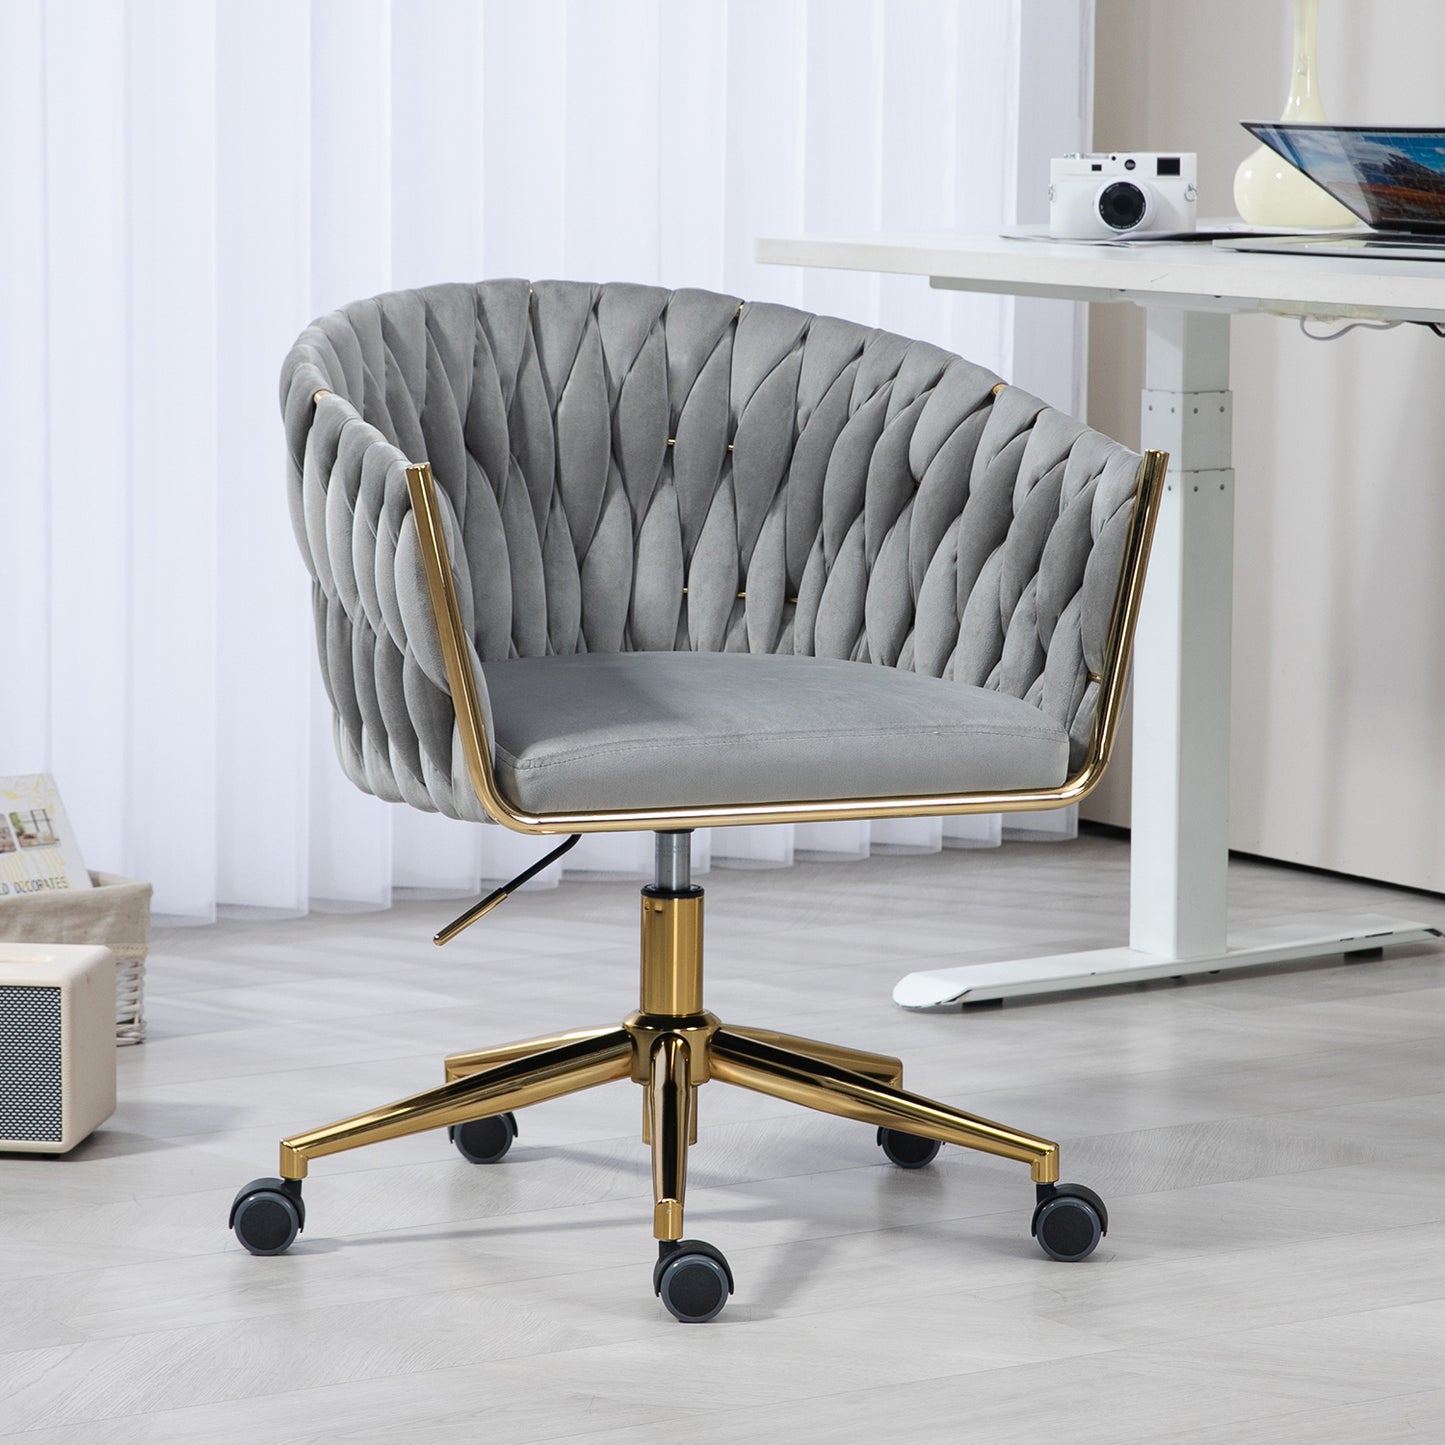 Modern design the backrest is hand-woven Office chair,Vanity chairs with wheels,Height adjustable,360°swivel for bedroom, living room(GREY)